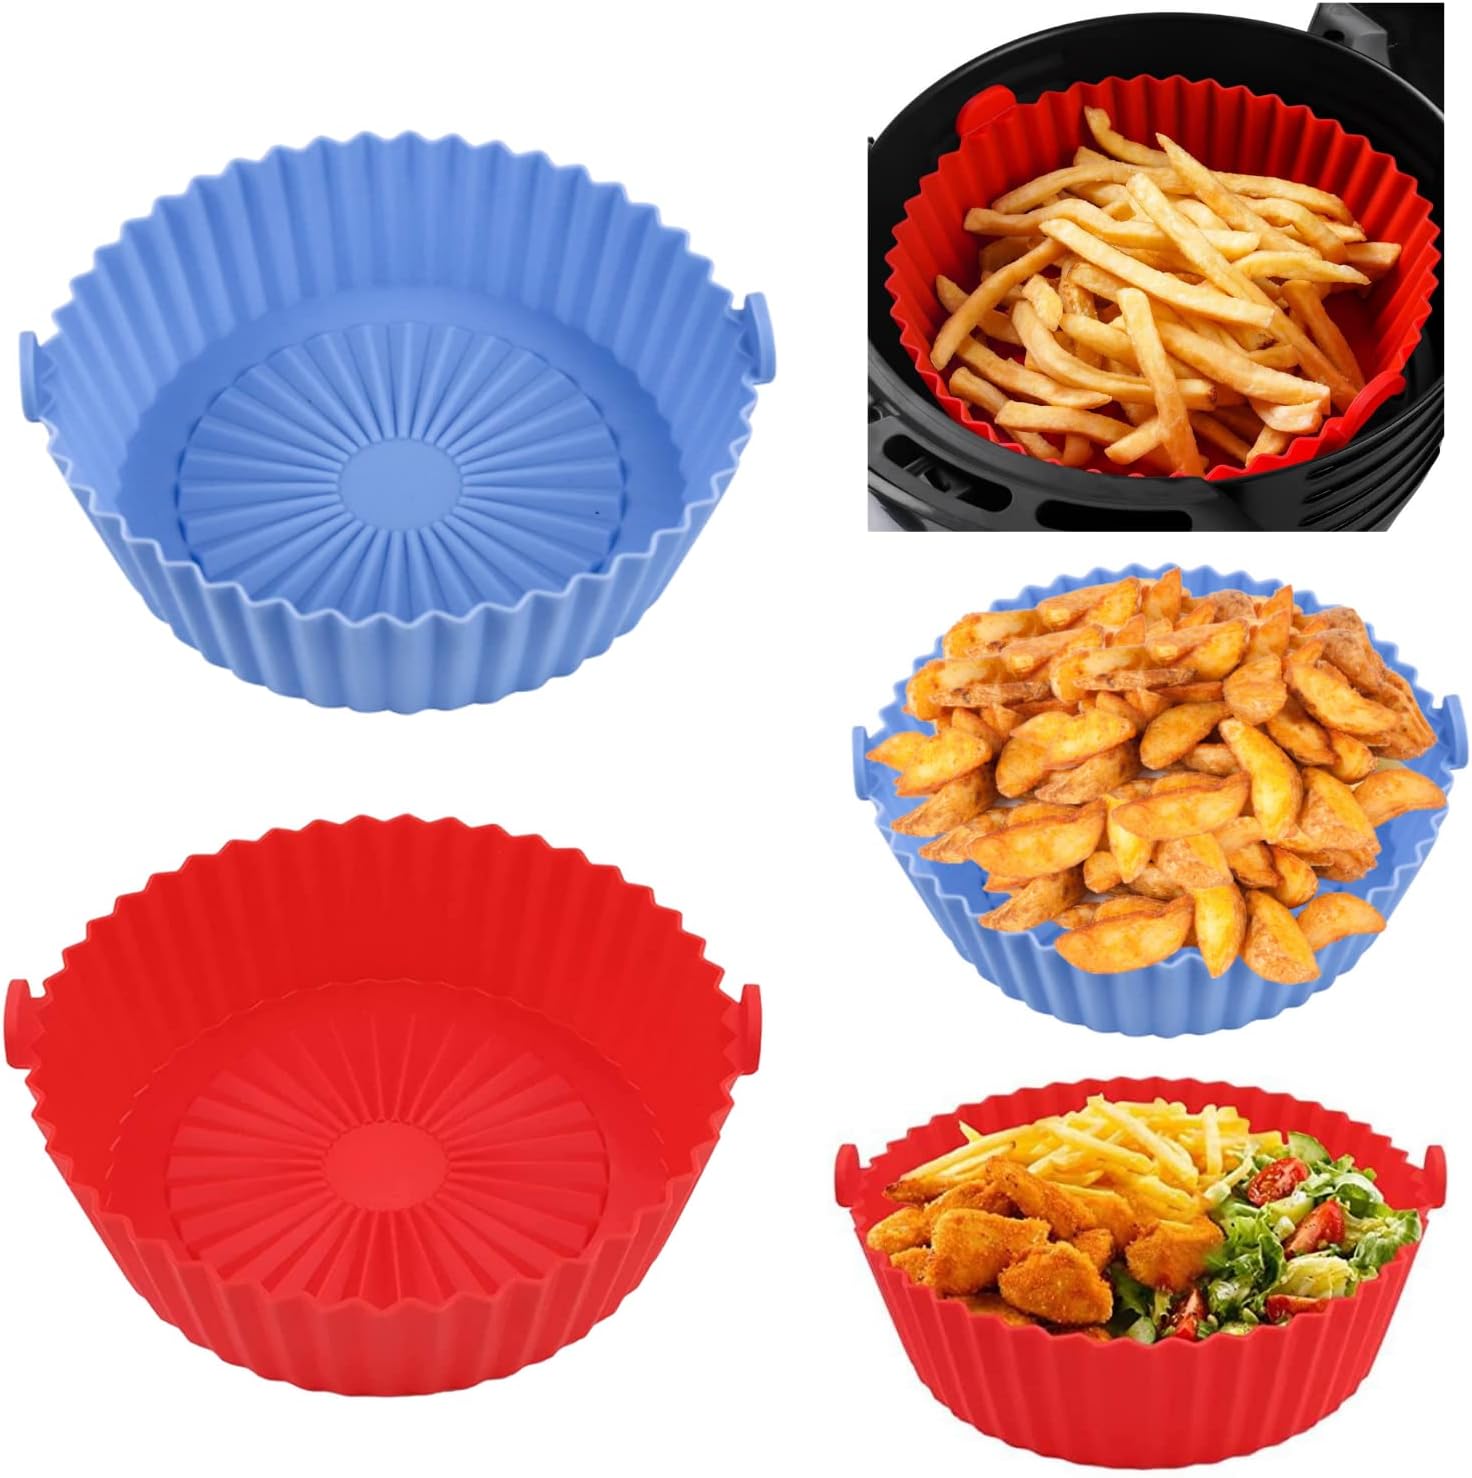 PLTHYMT 2pcs Silicone Air Fryer Liners 6.5 inch, Reusable Air Fryer Basket Accessories Round, Food Grade Silicone for Air Fryer 2 to 5 AFSS2-RB